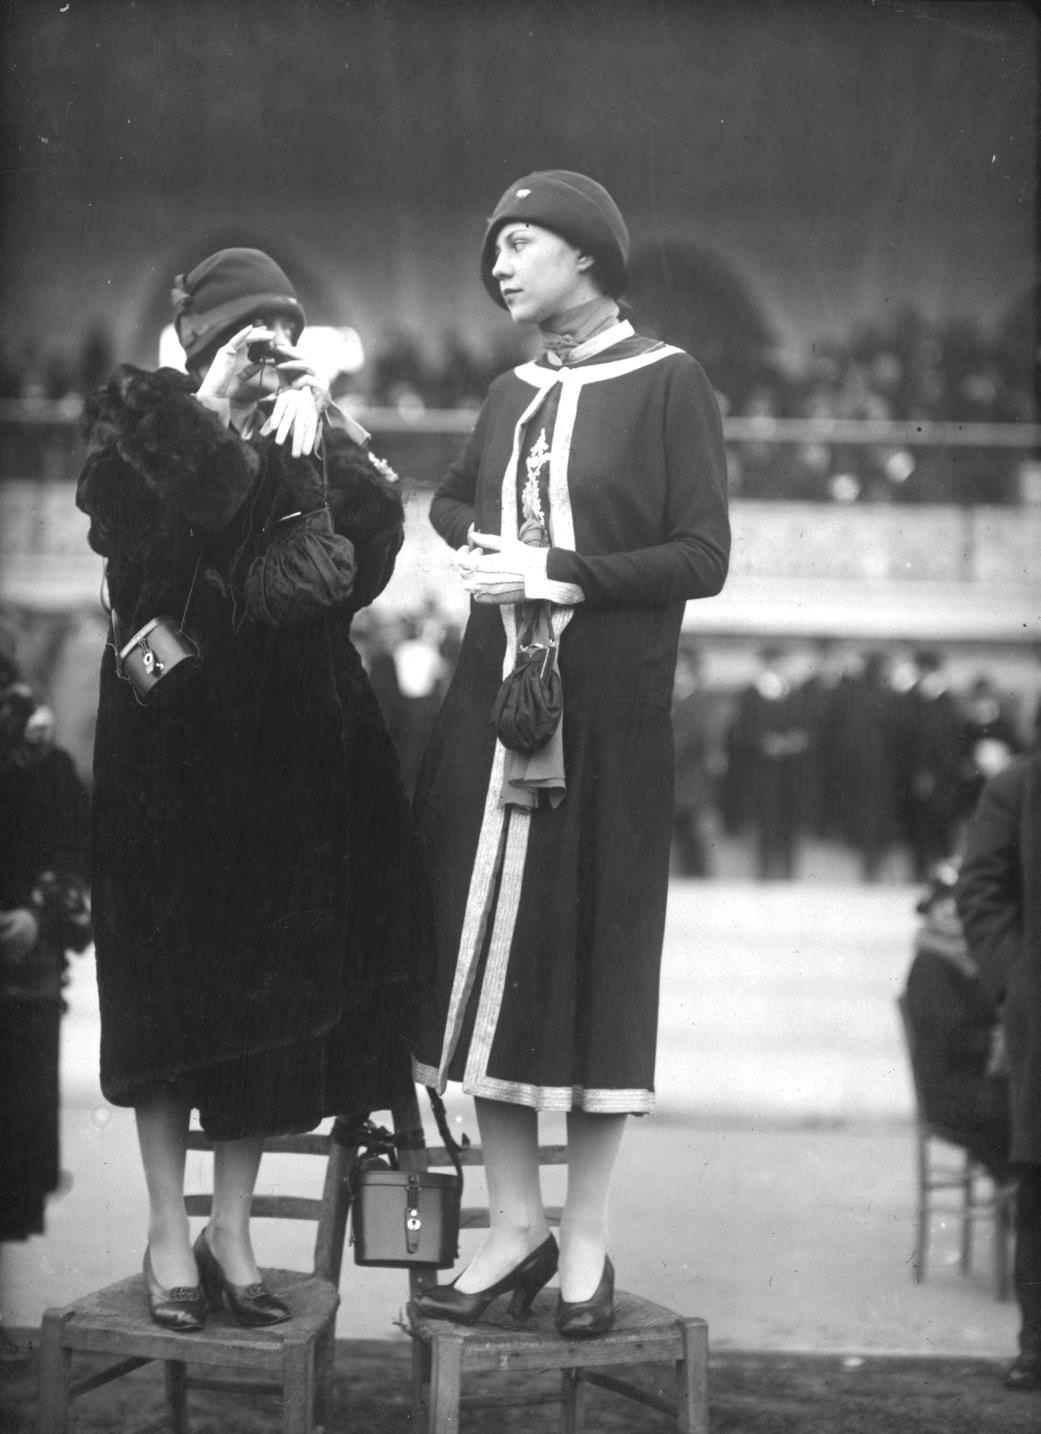 The latest fashions on public display, including fur coat and a knee length tunic coat with a single button at the neck, typical of the early 1920s.